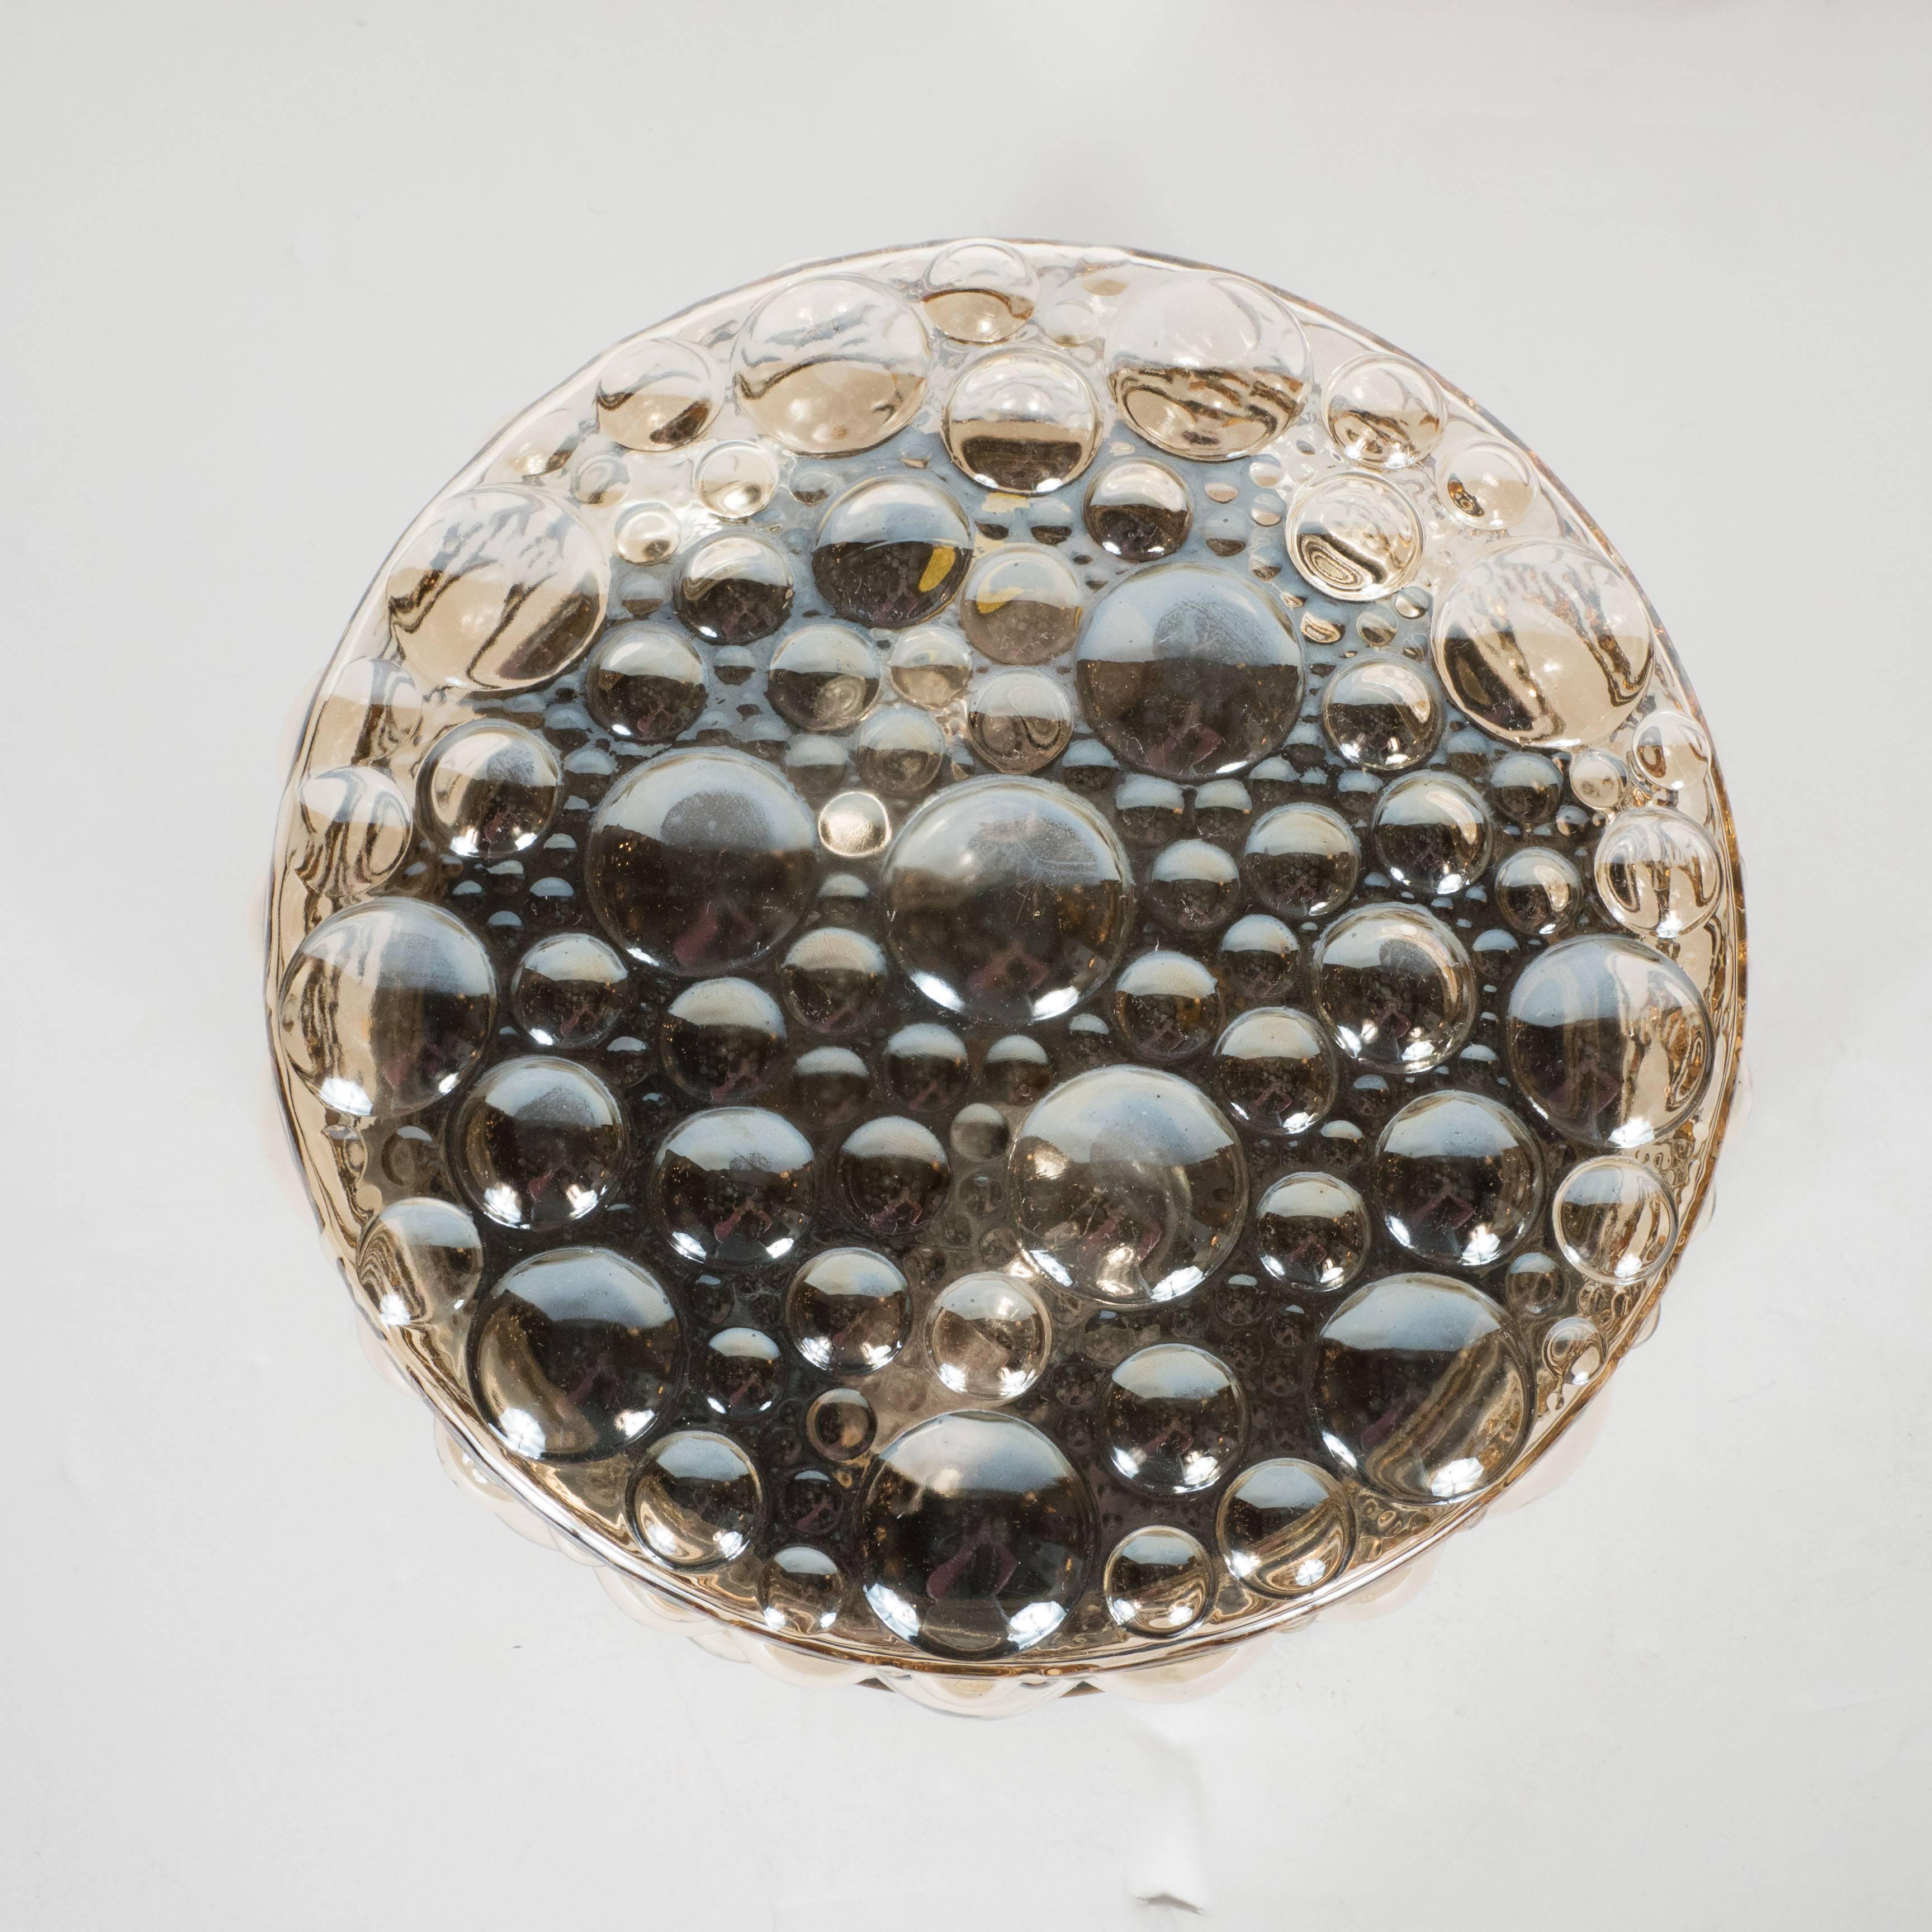 A Mid-Century Modernist textured bubble glass flush mount chandelier with antiqued brass fittings. A single, stepped detail antiqued brass ring supports a disc-shaped, textured smoked glass shade, adorned with outward protruding bubbles in various